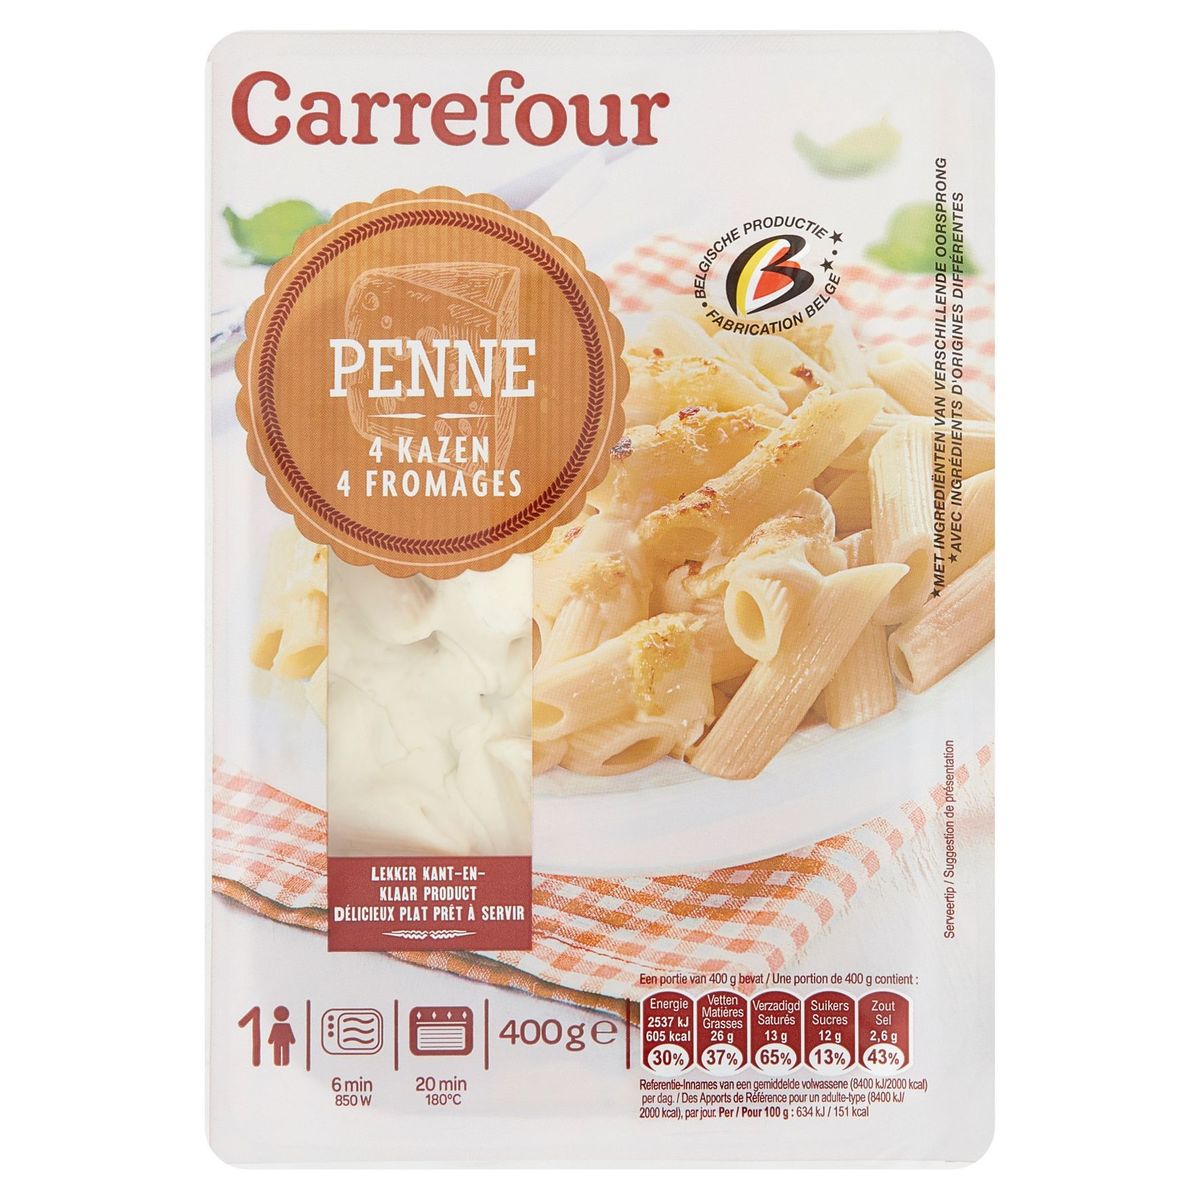 Carrefour Penne 4 Fromages 400 g